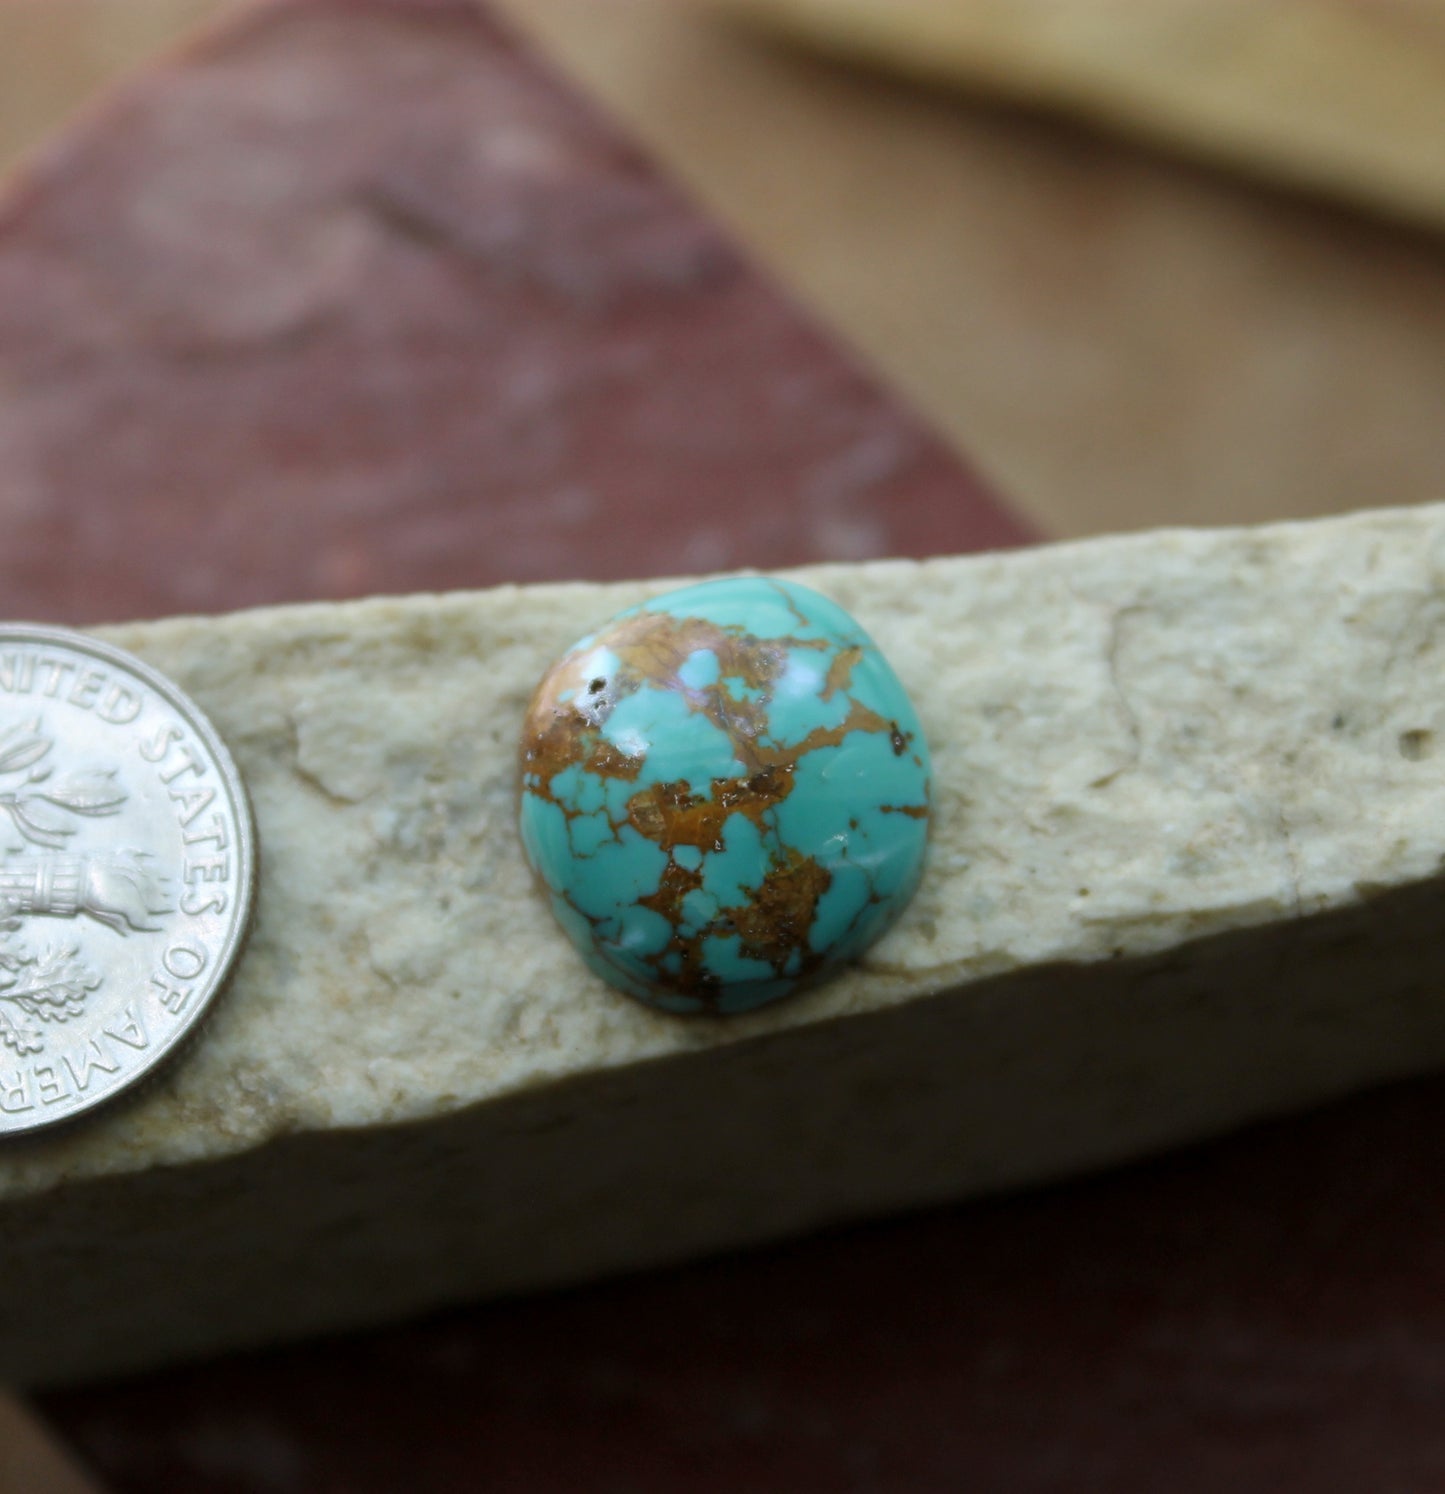 7 carat blue Stone Mountain Turquoise cabochon with a red matrix